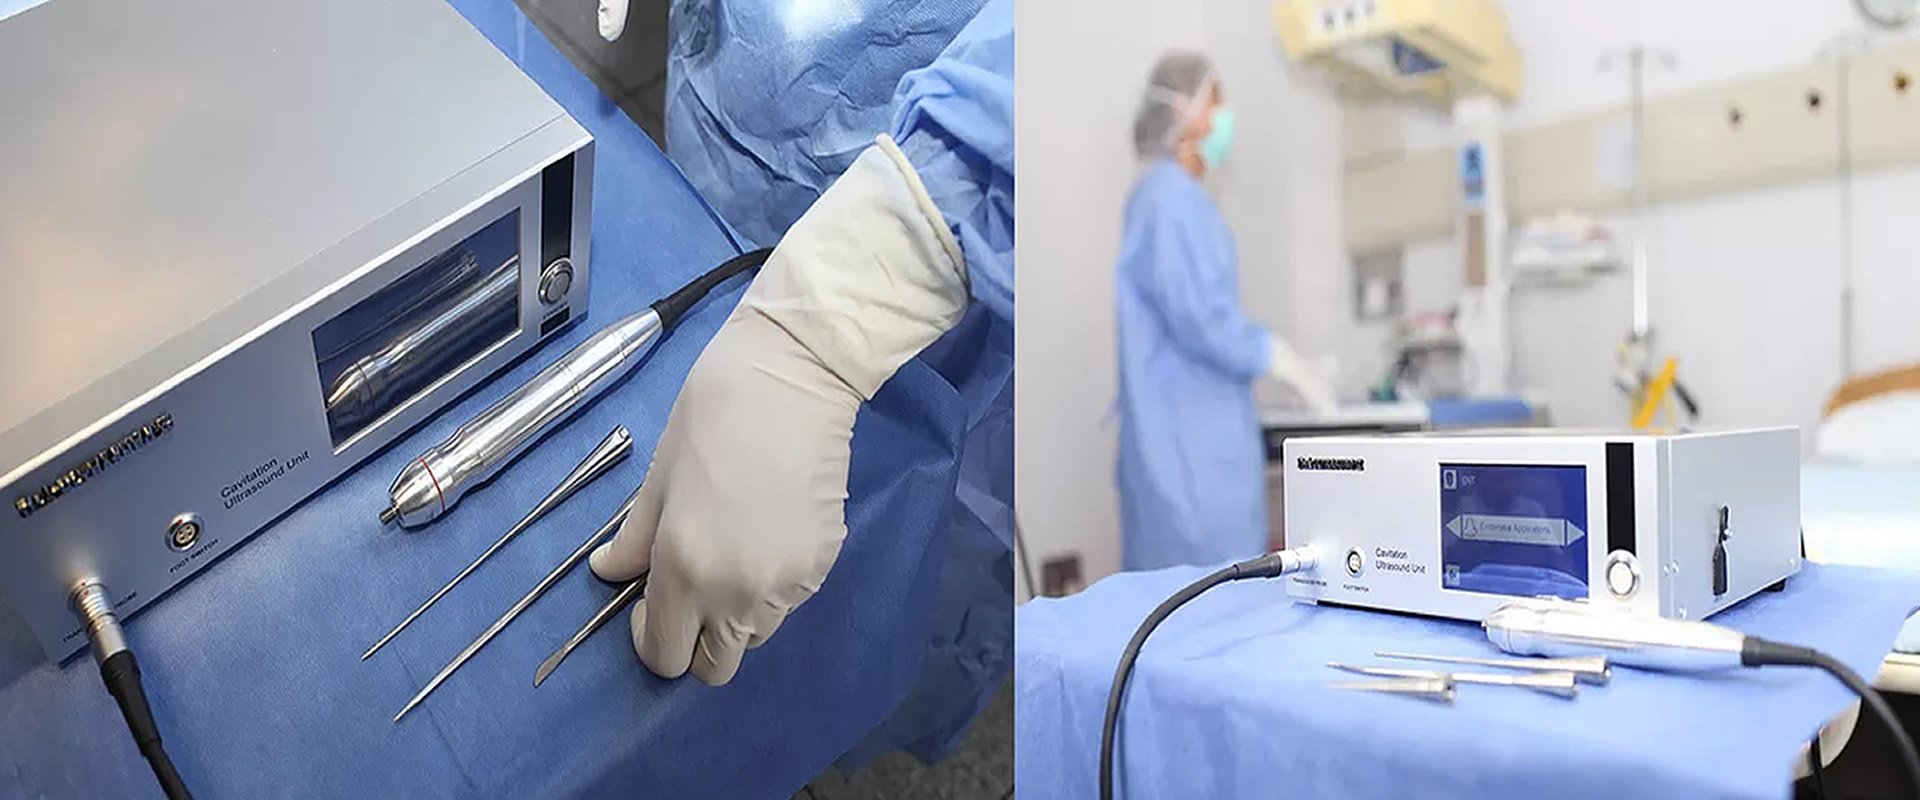 Ultrasurg II device for hospital and office use